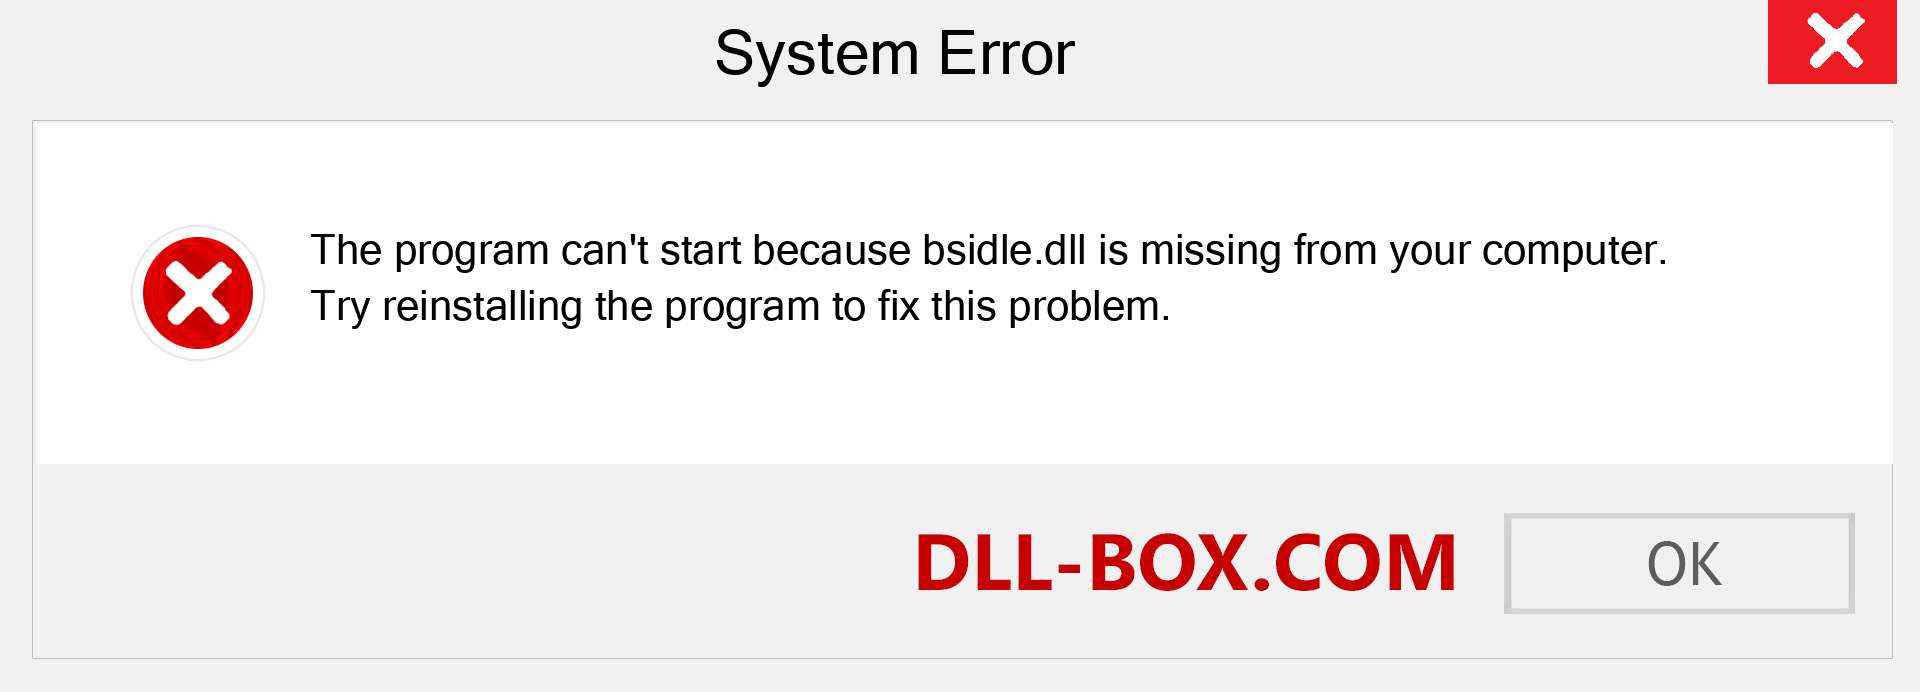  bsidle.dll file is missing?. Download for Windows 7, 8, 10 - Fix  bsidle dll Missing Error on Windows, photos, images